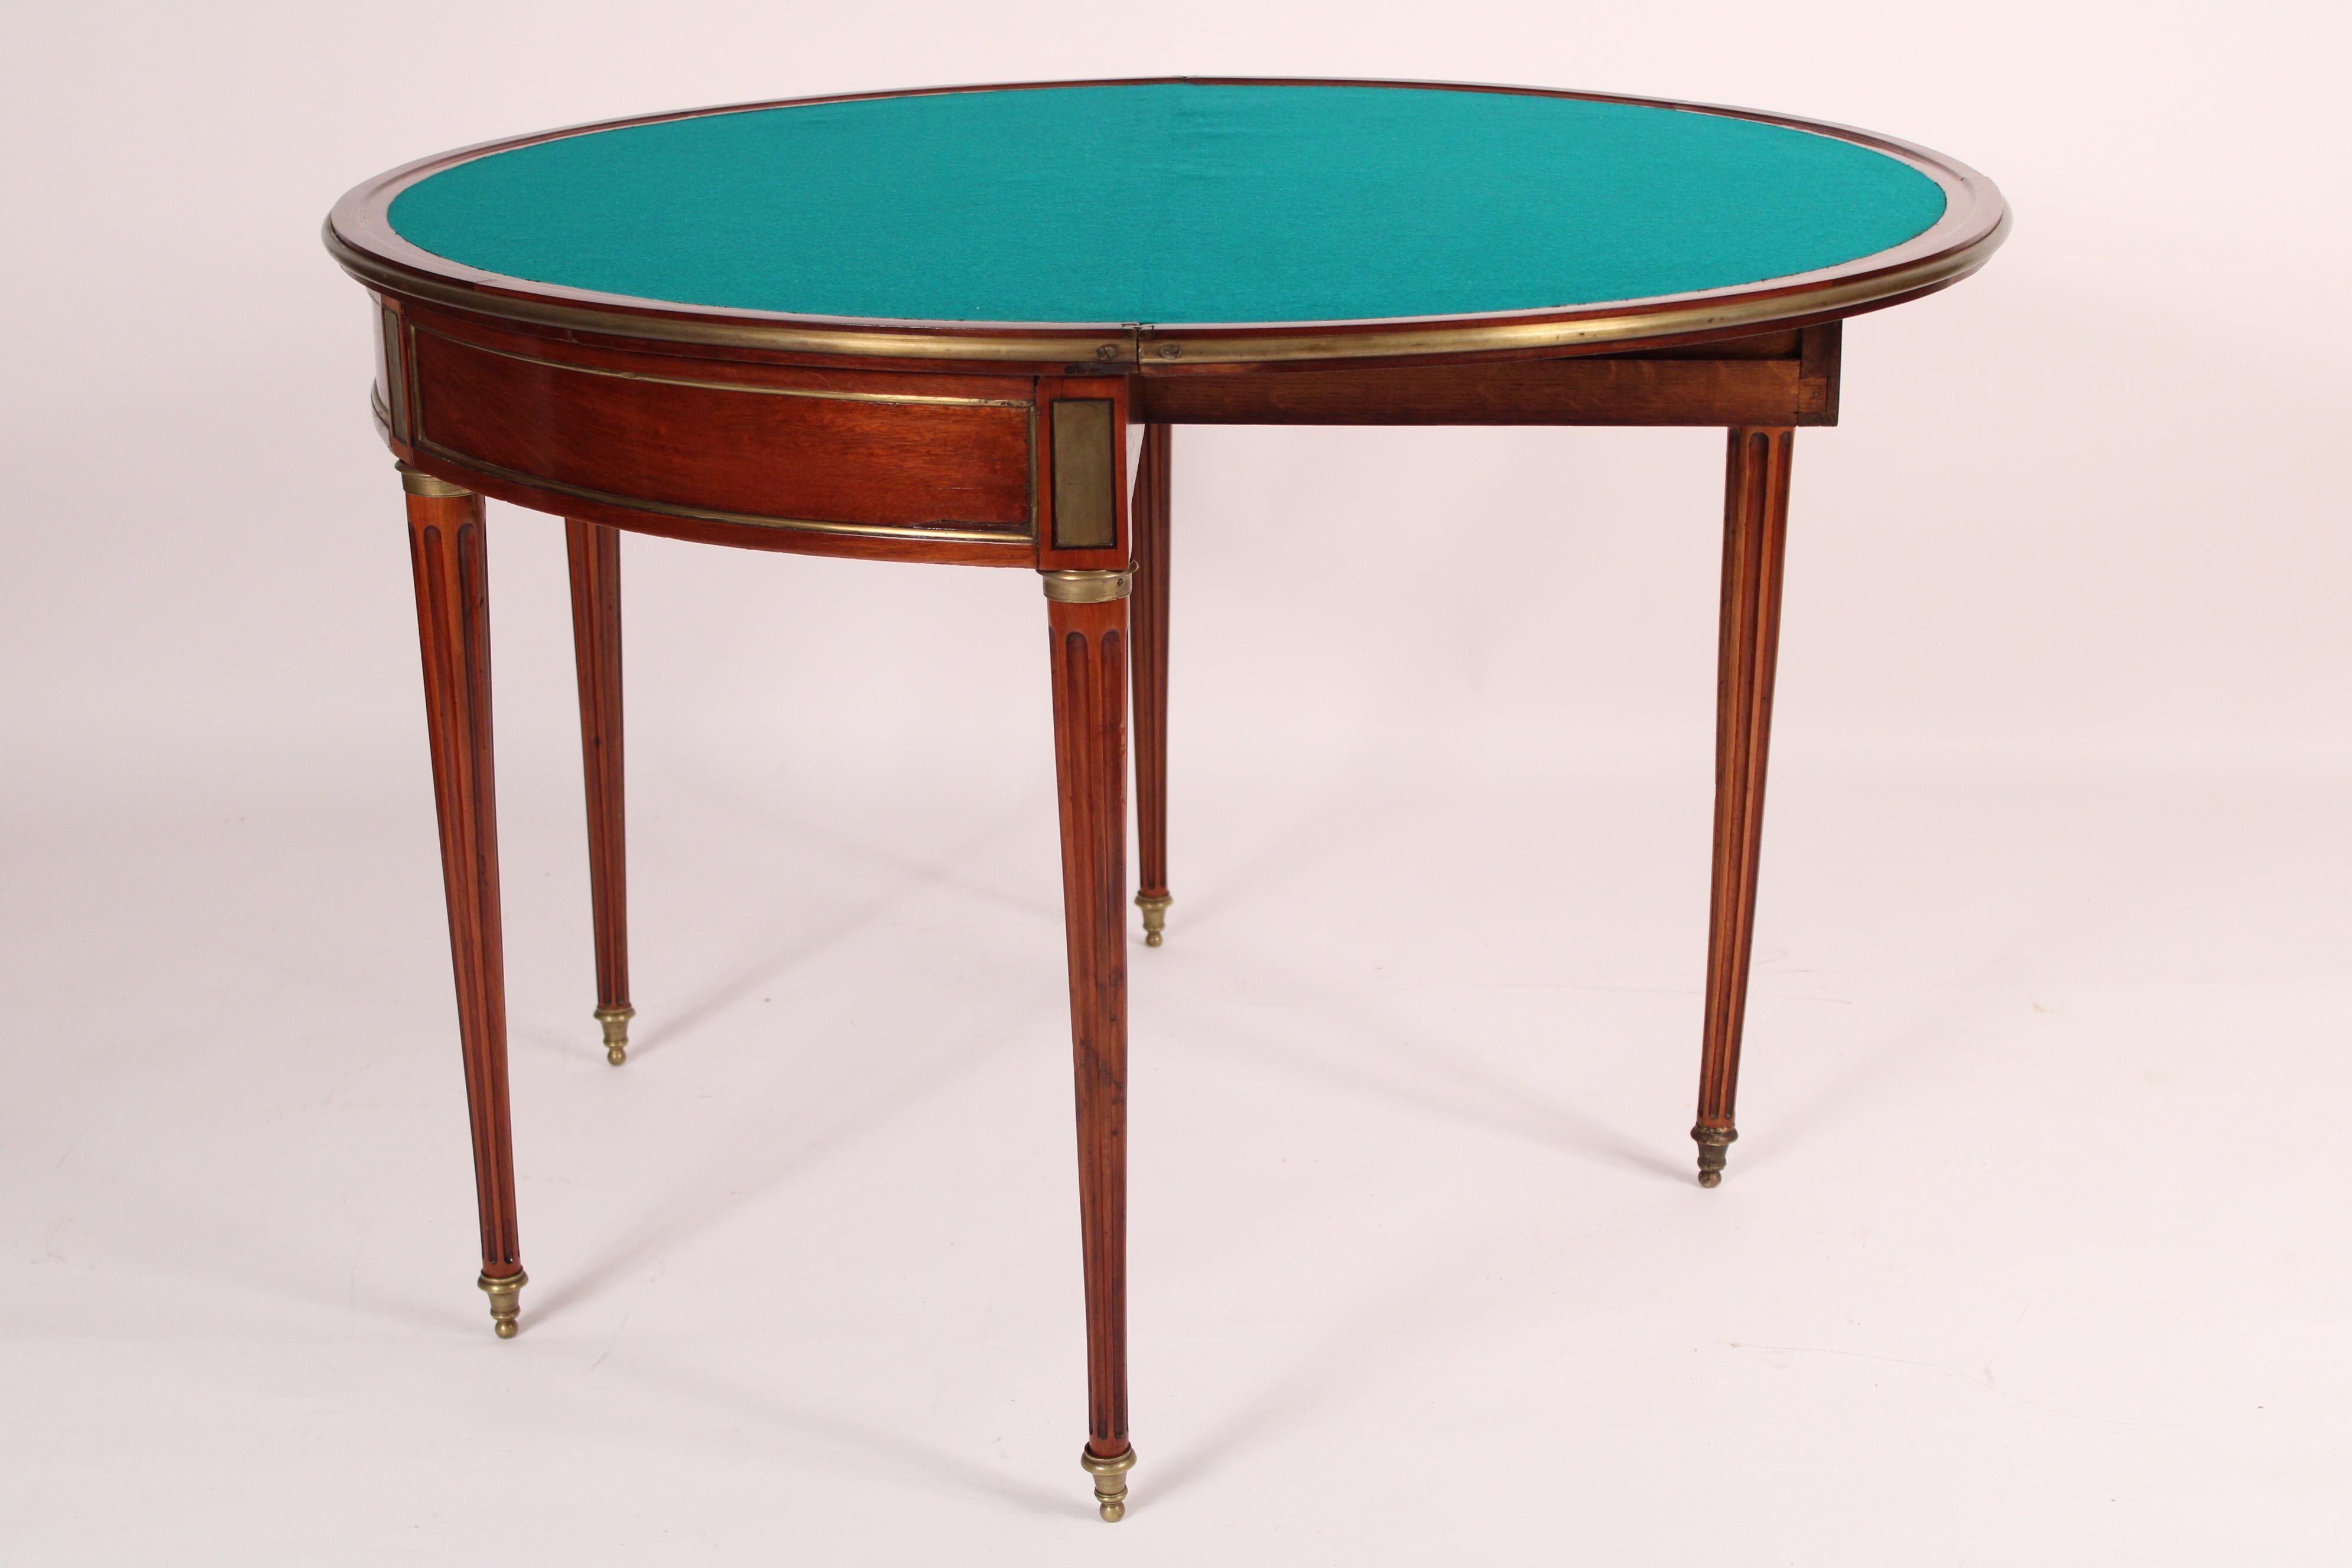 19th Century Signed Jansen Louis XVI Style Mahogany Brass Mounted Games Table